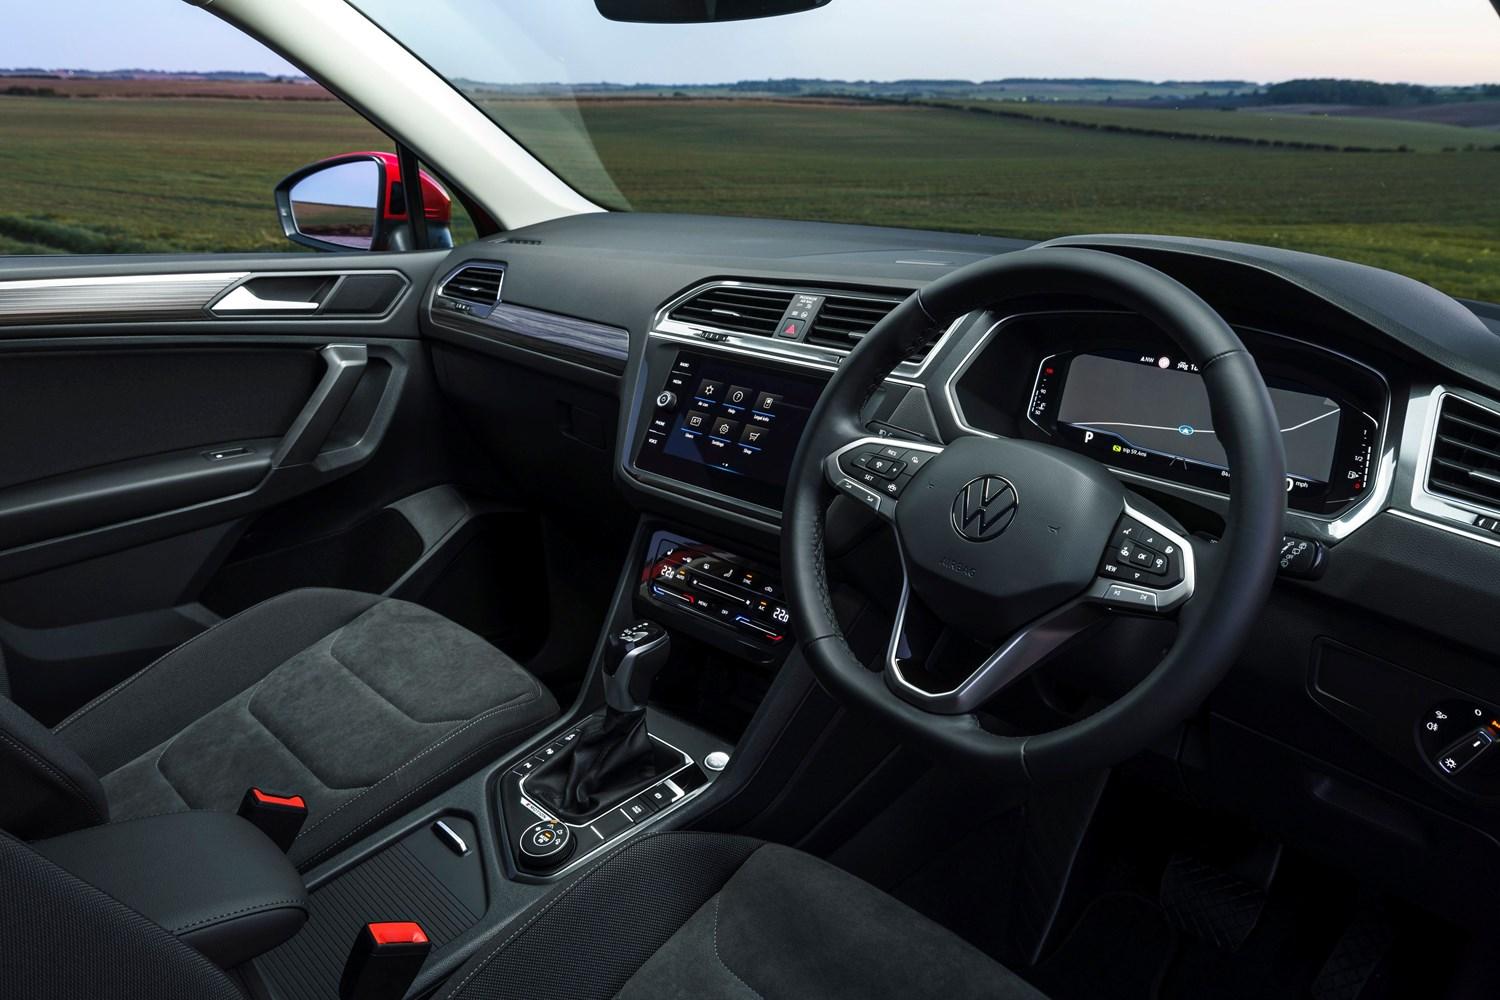 Close-up of the front passenger seats, centre console and steering wheel in the Volkswagen Tiguan Allspace